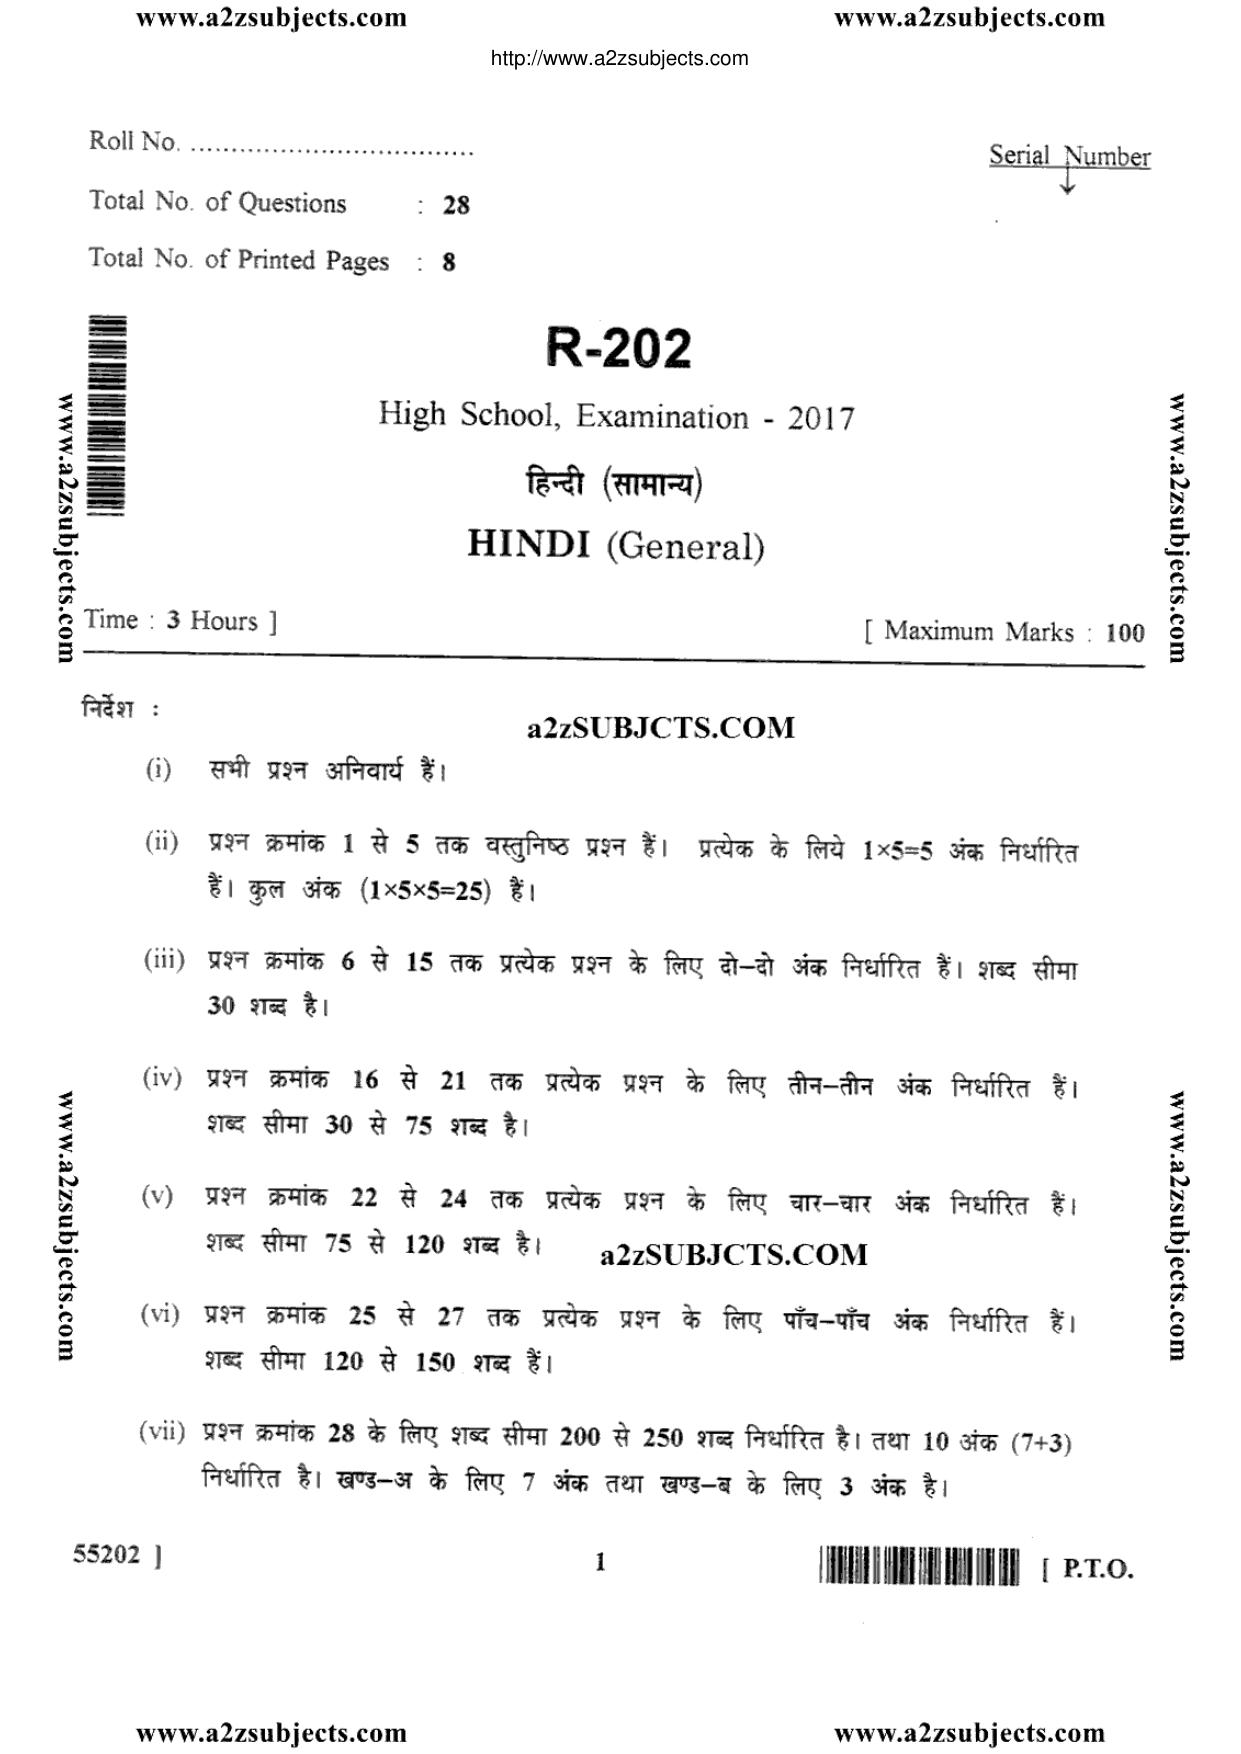 MP Board Class 10 Marathi 2017 Question Paper - Page 1